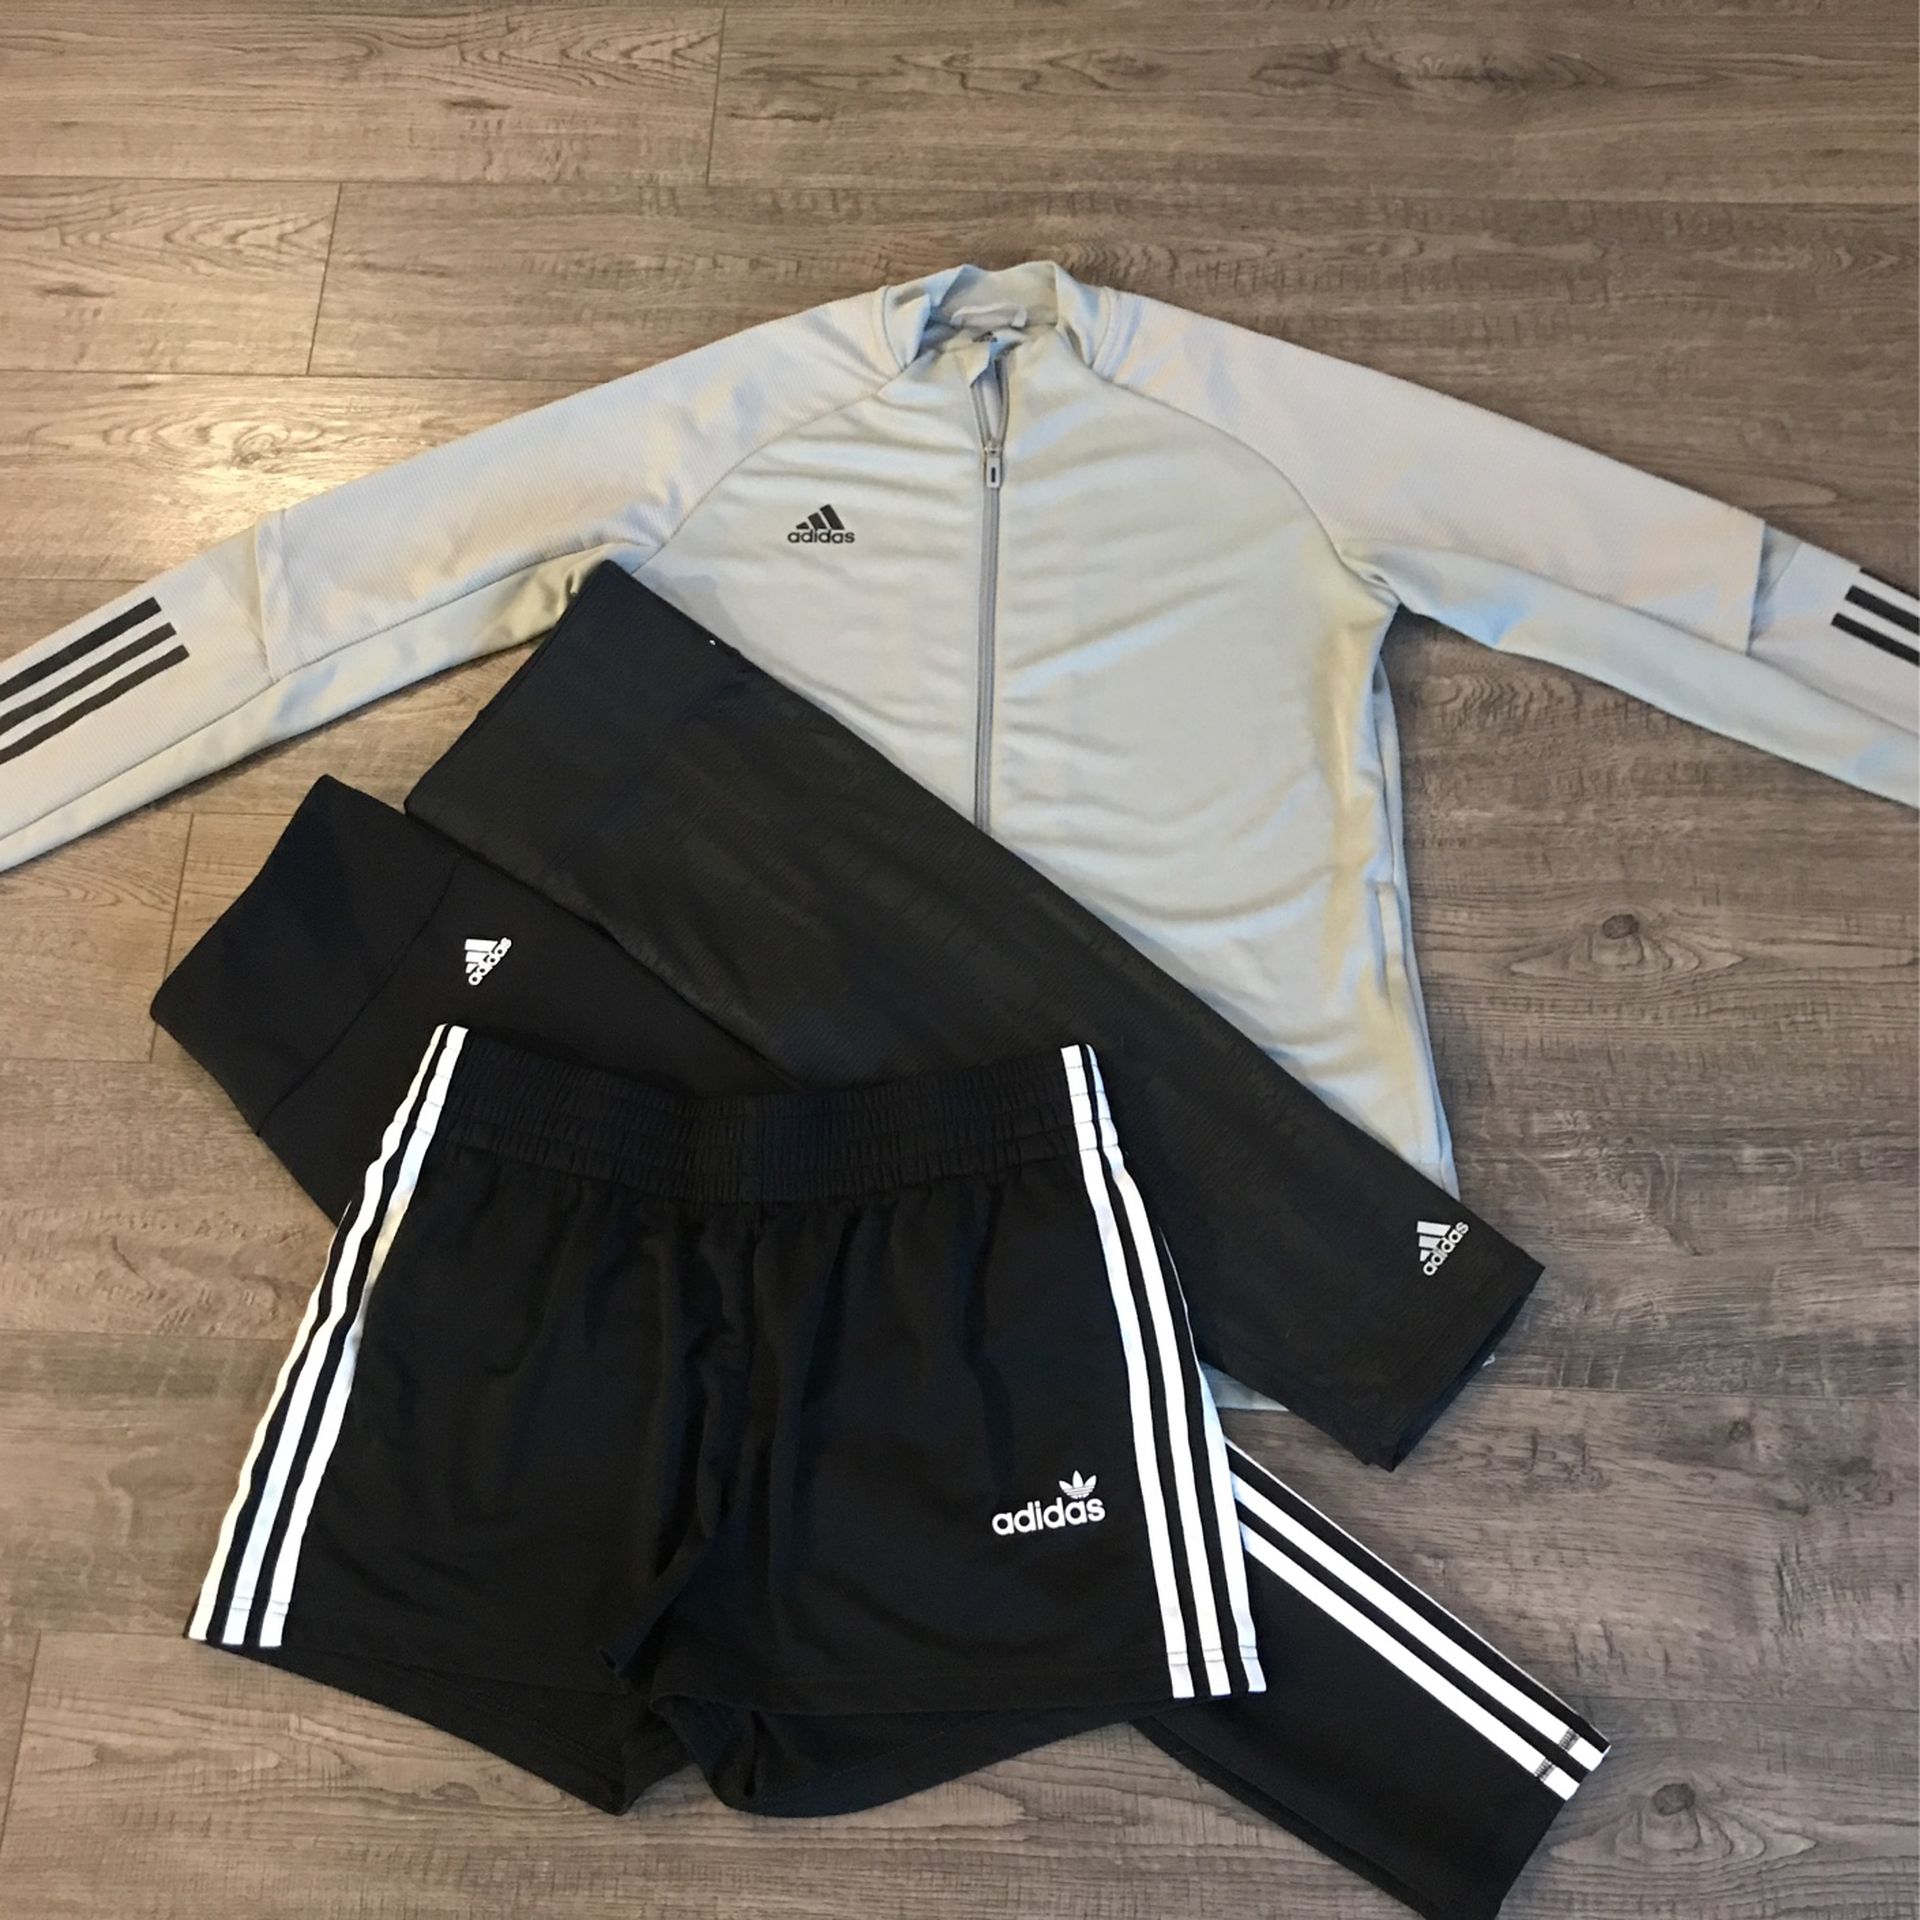 Adidas Women’s Athletic Clothes 